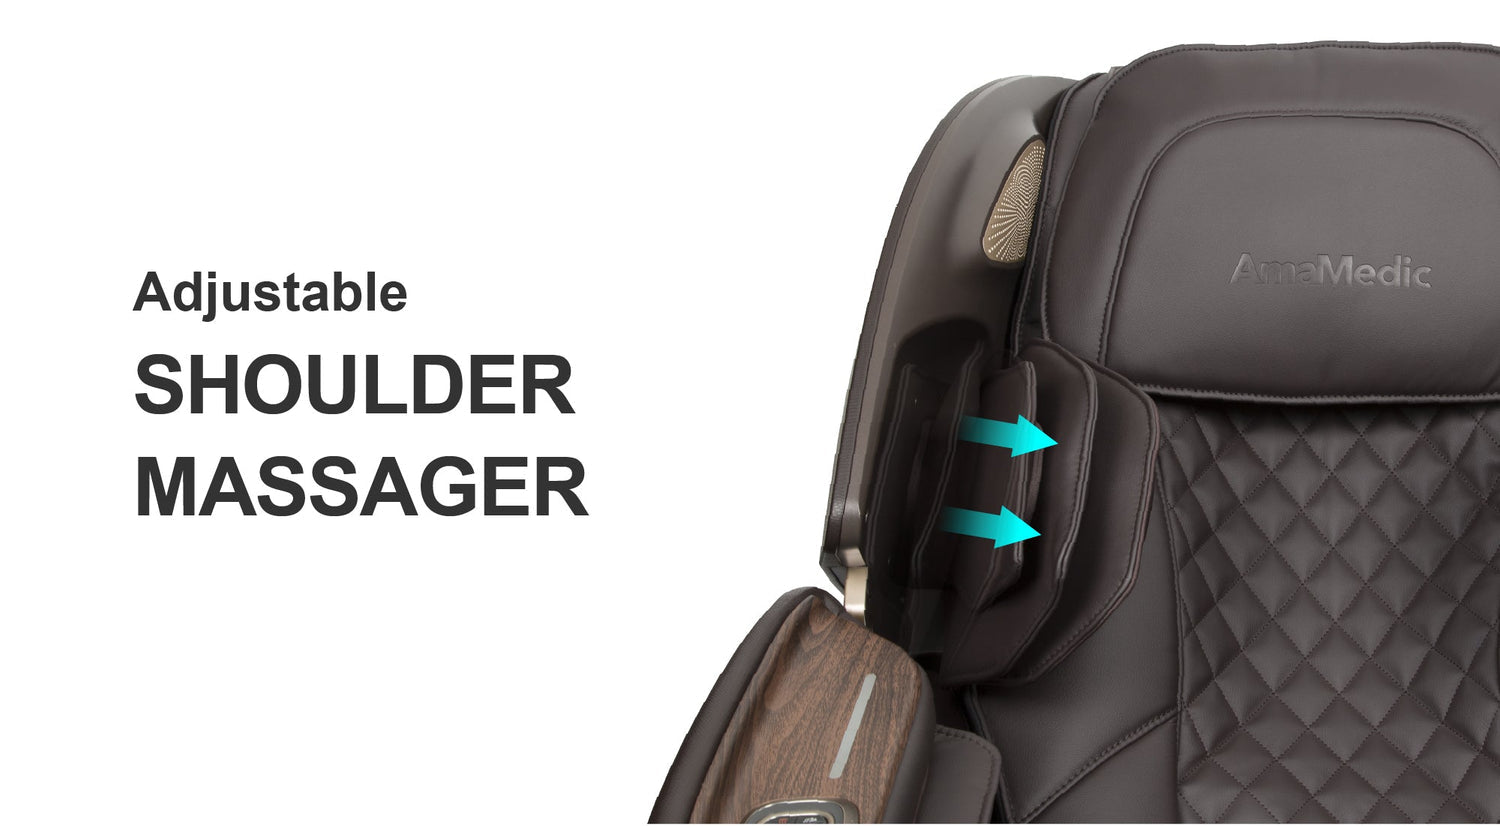 The Amamedic Hilux 4D Massage Chair has an adjustable shoulder massager that easily tightens by pushing the massager inwards.